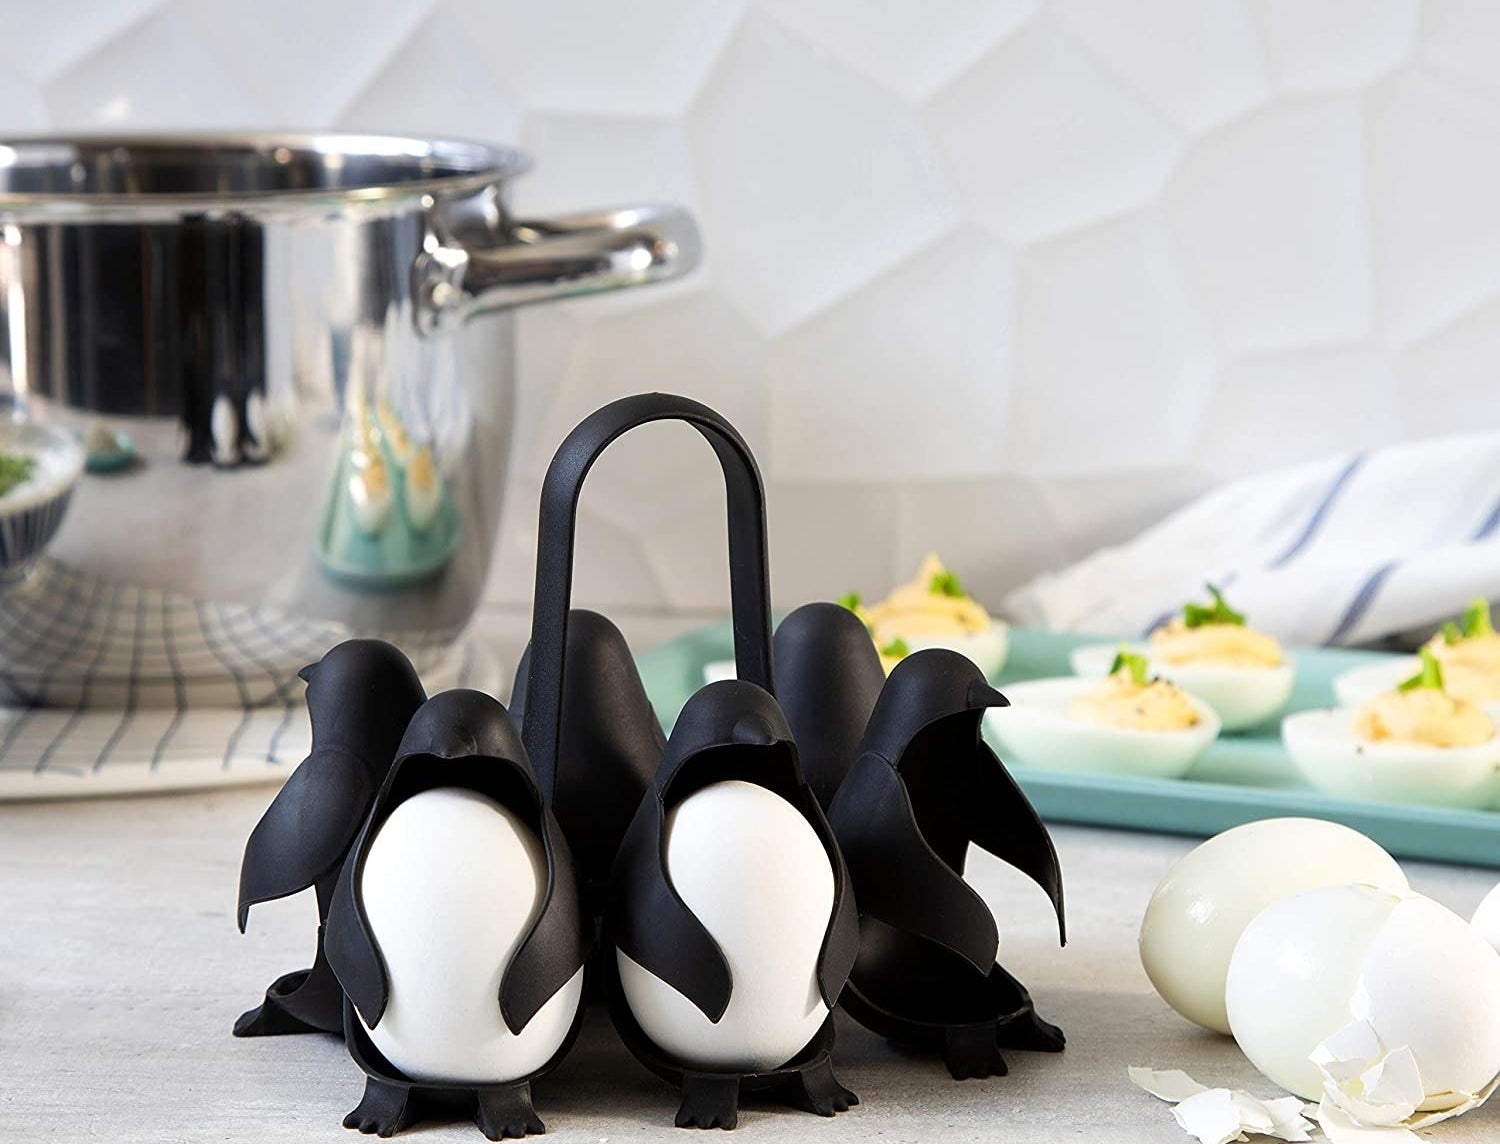 The egg holder, which looks six little penguins connected by a handle